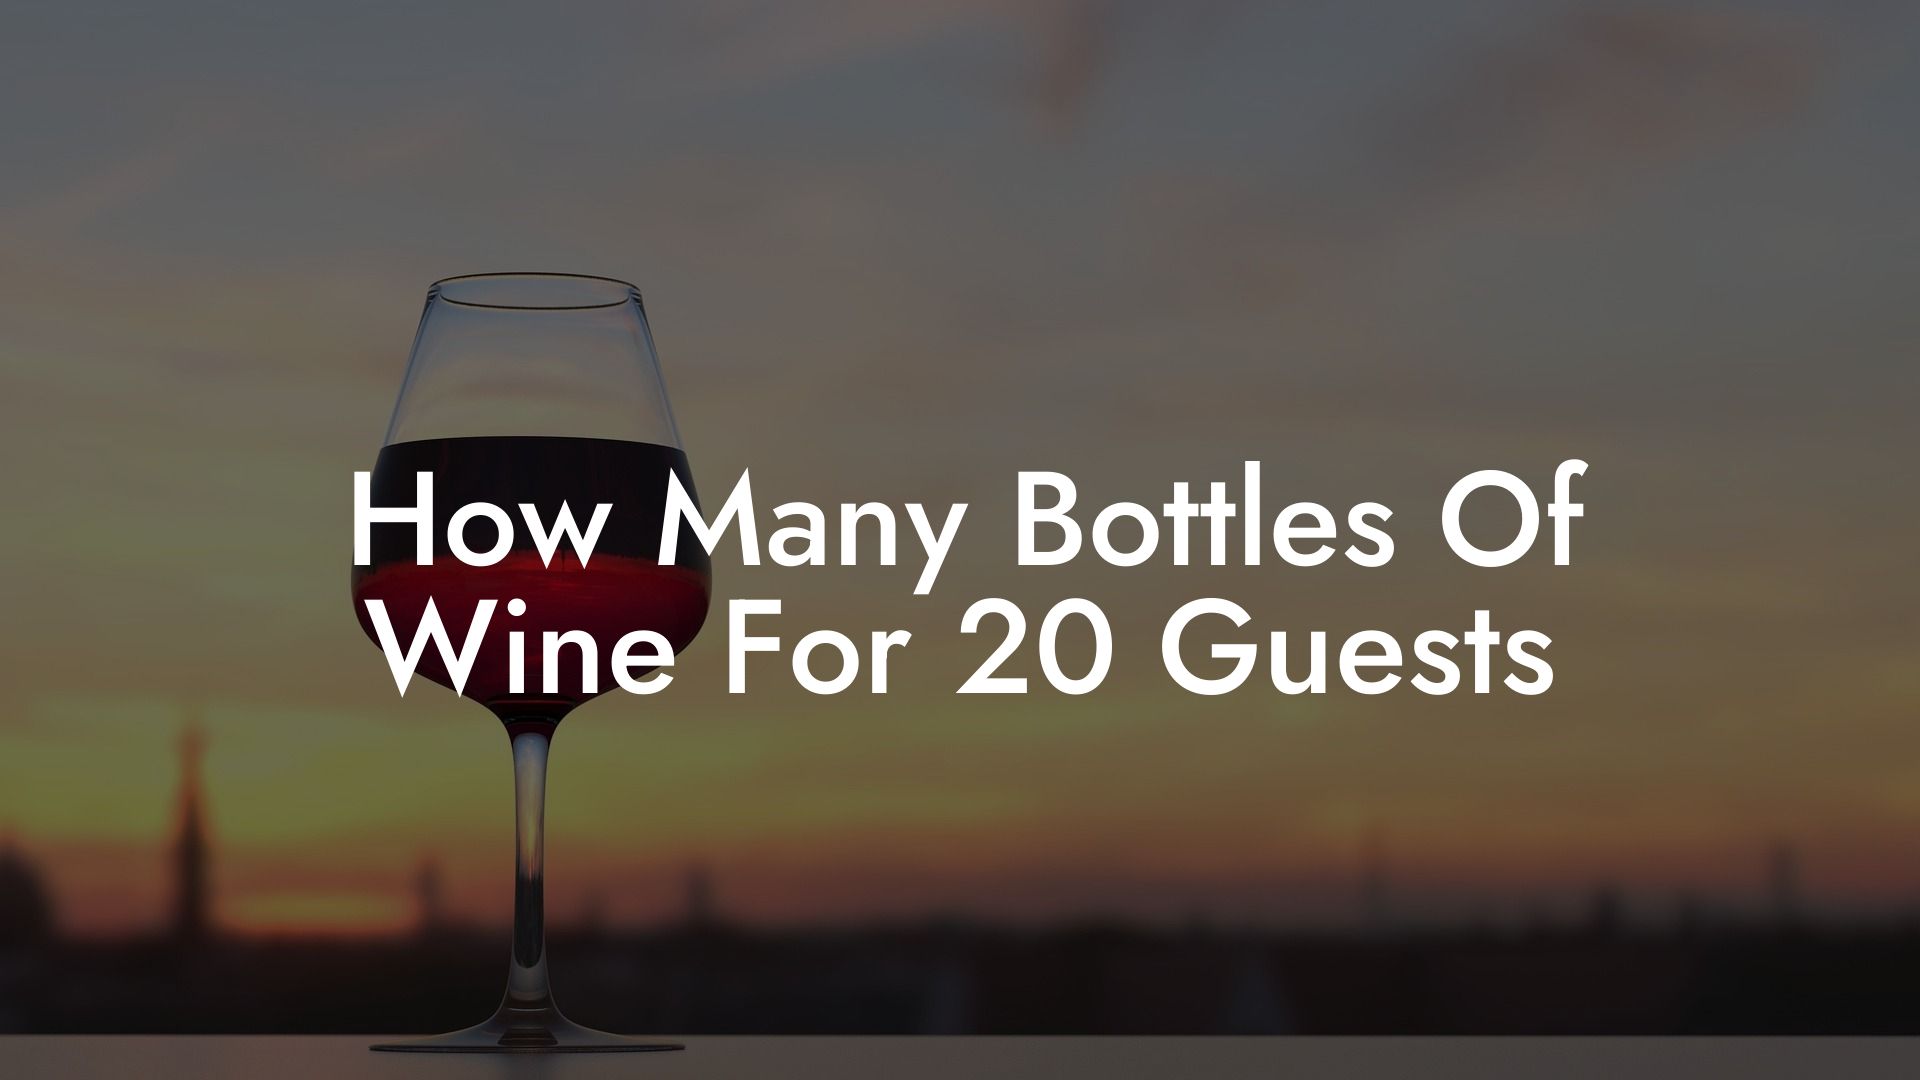 How Many Bottles Of Wine For 20 Guests